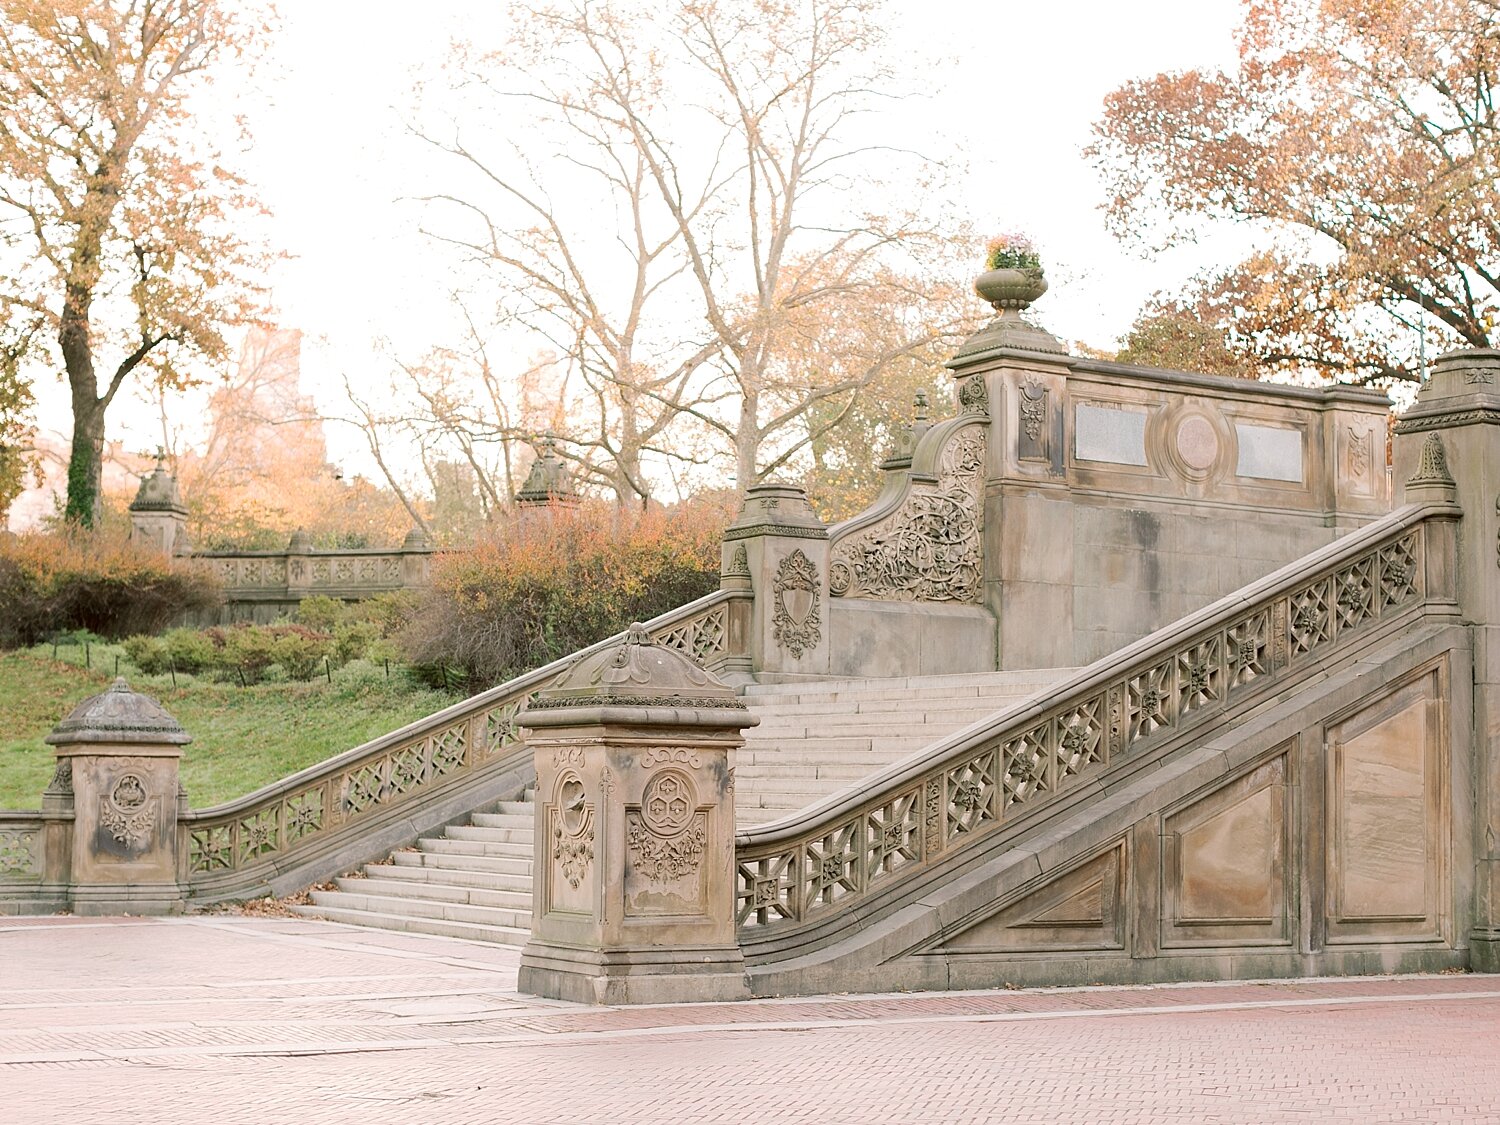 Central Park engagement session by Asher Gardner Photography